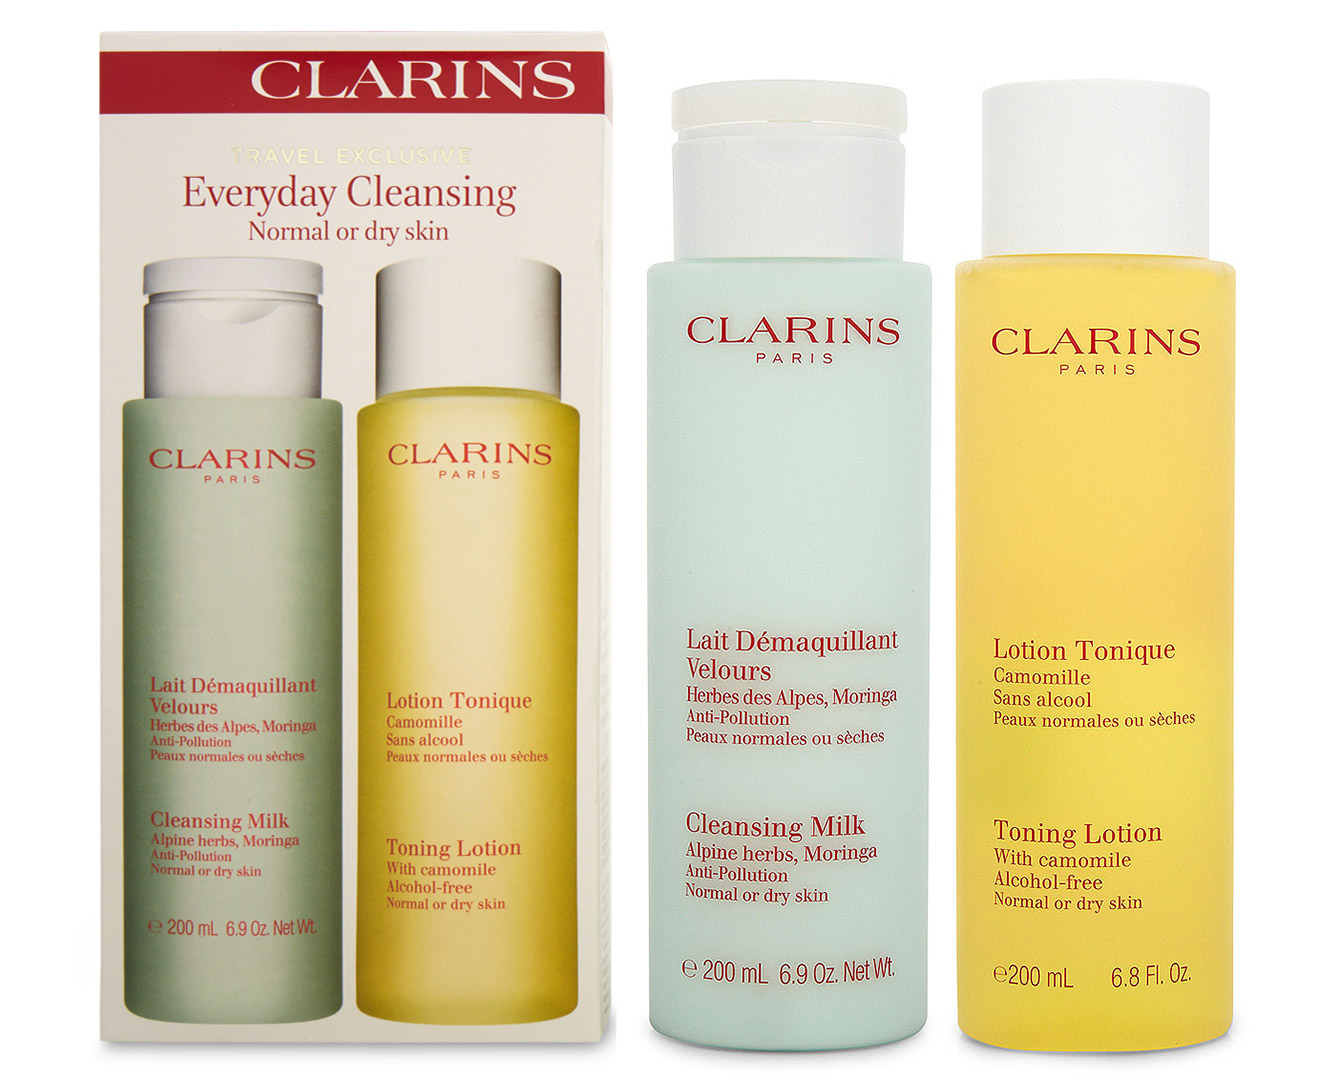 Clarins Everyday Cleansing Kit